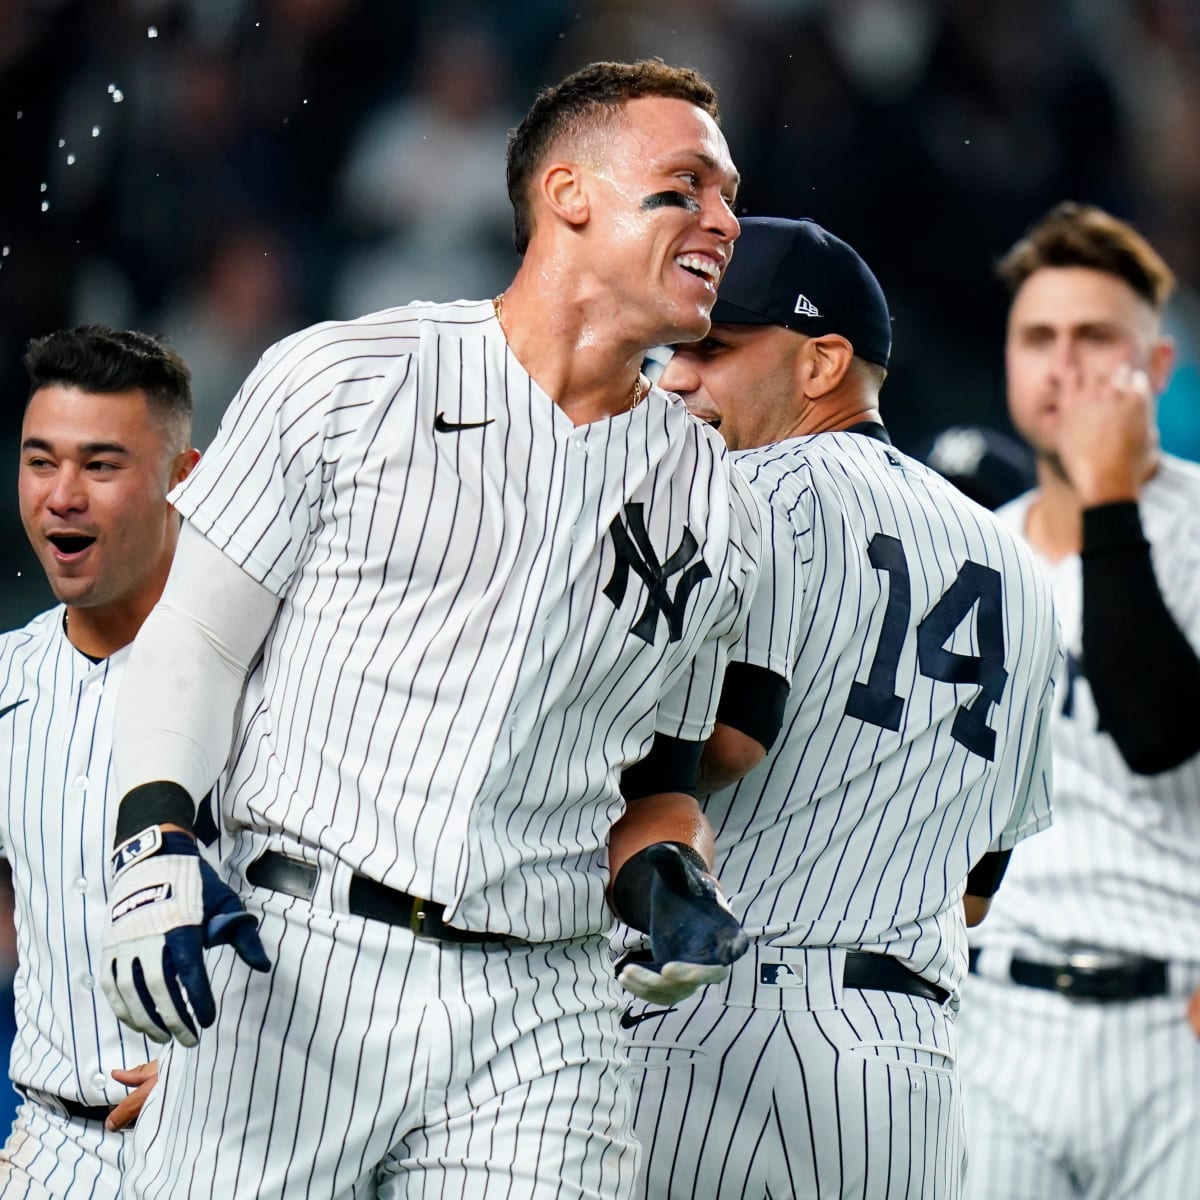 Yankees Notebook: Giancarlo Stanton back in the starting lineup